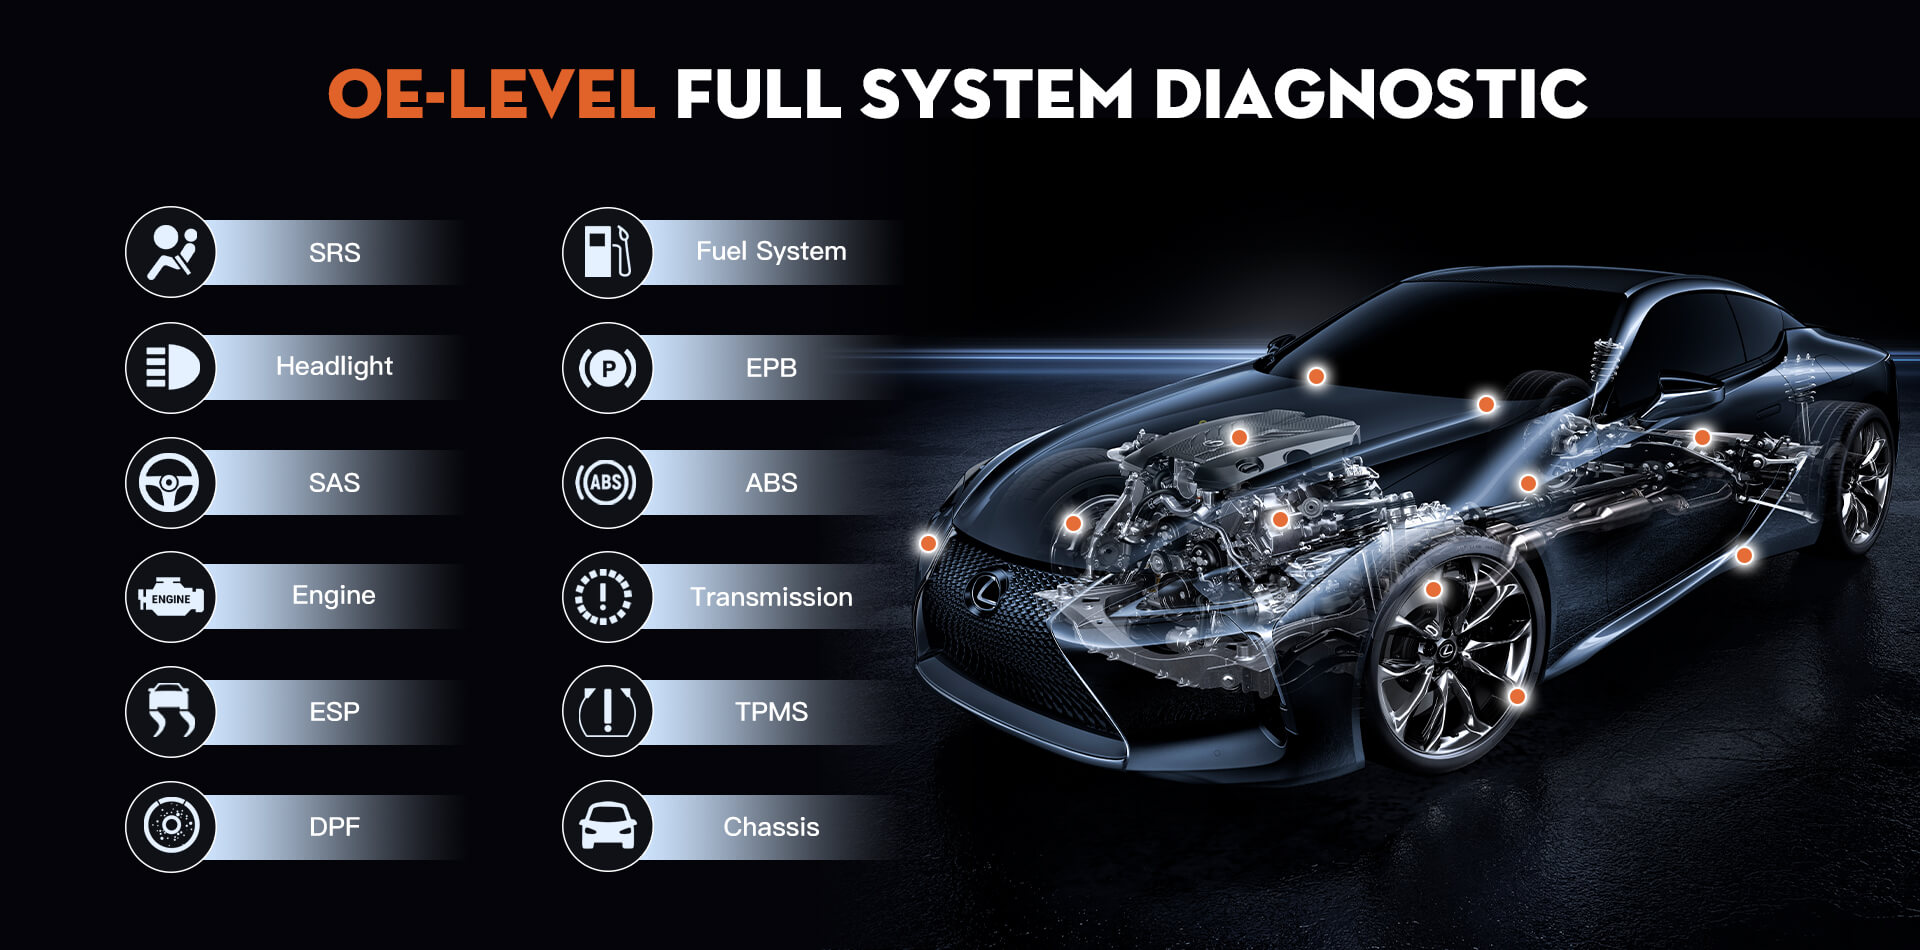 All System Diagnosis